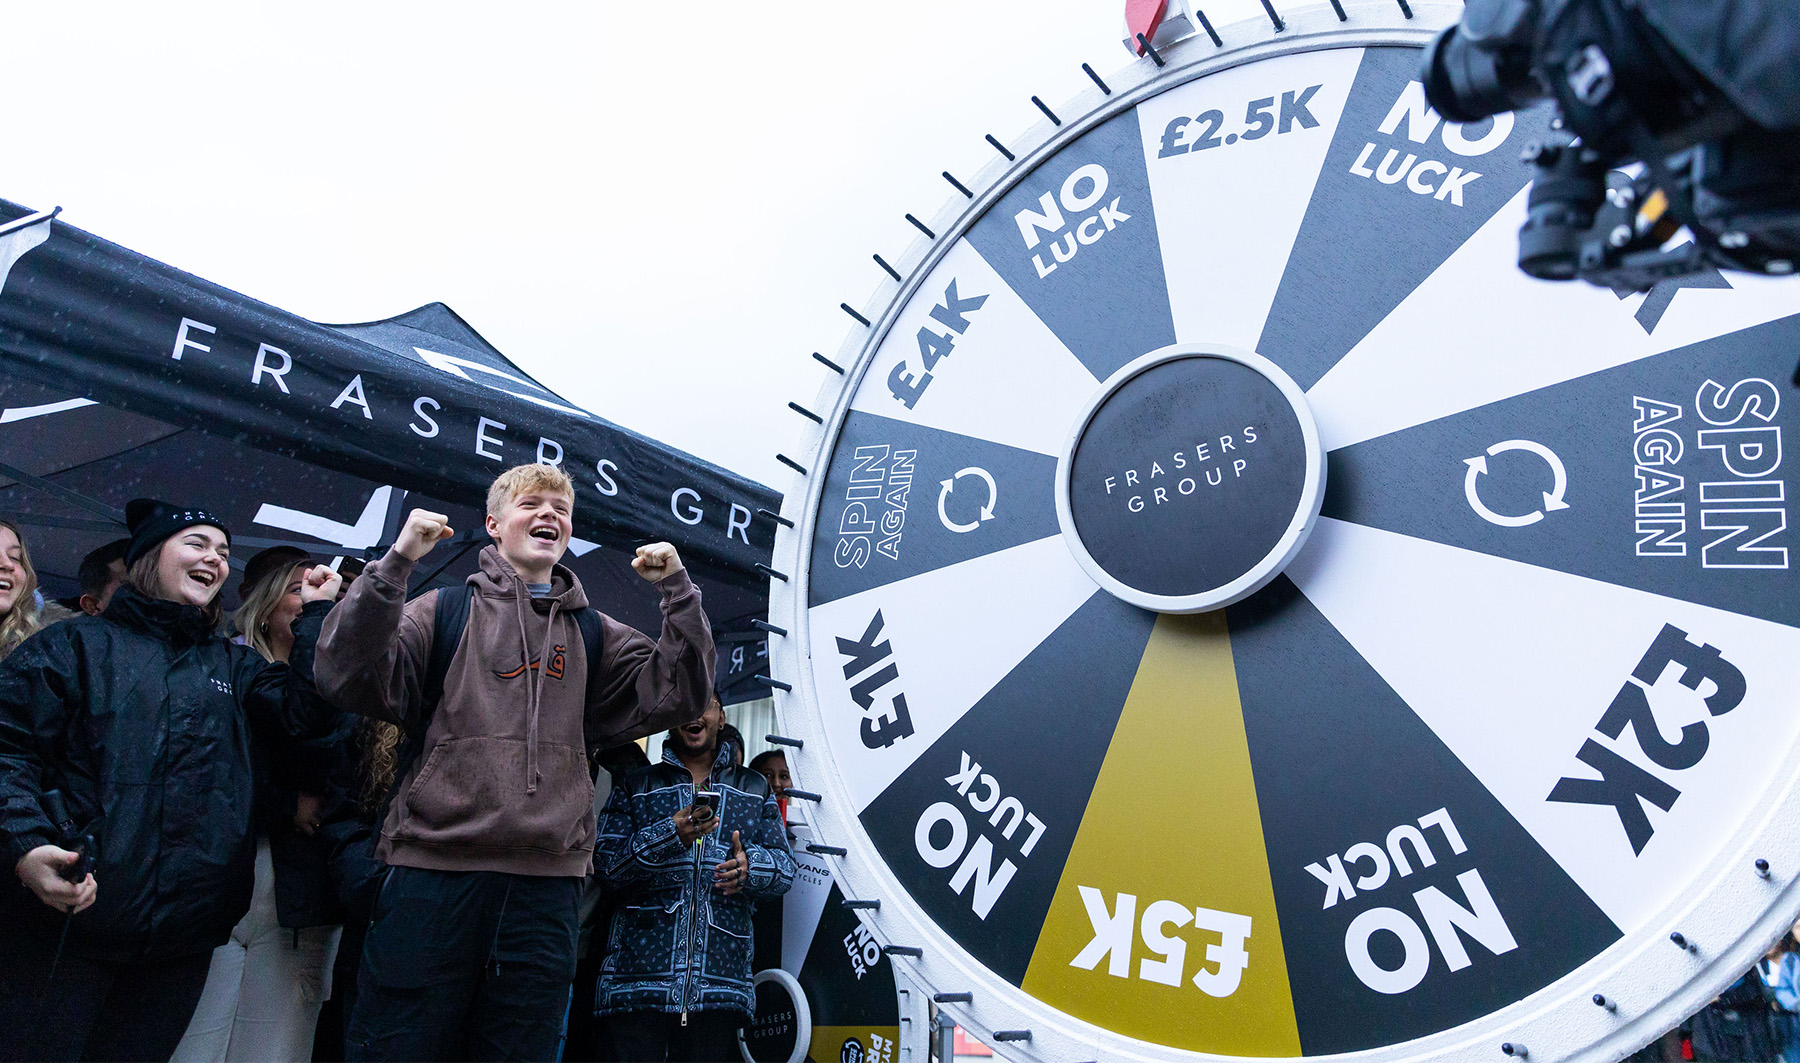 Photo of young male student winning a £2.5k prize in a spin the wheel competition